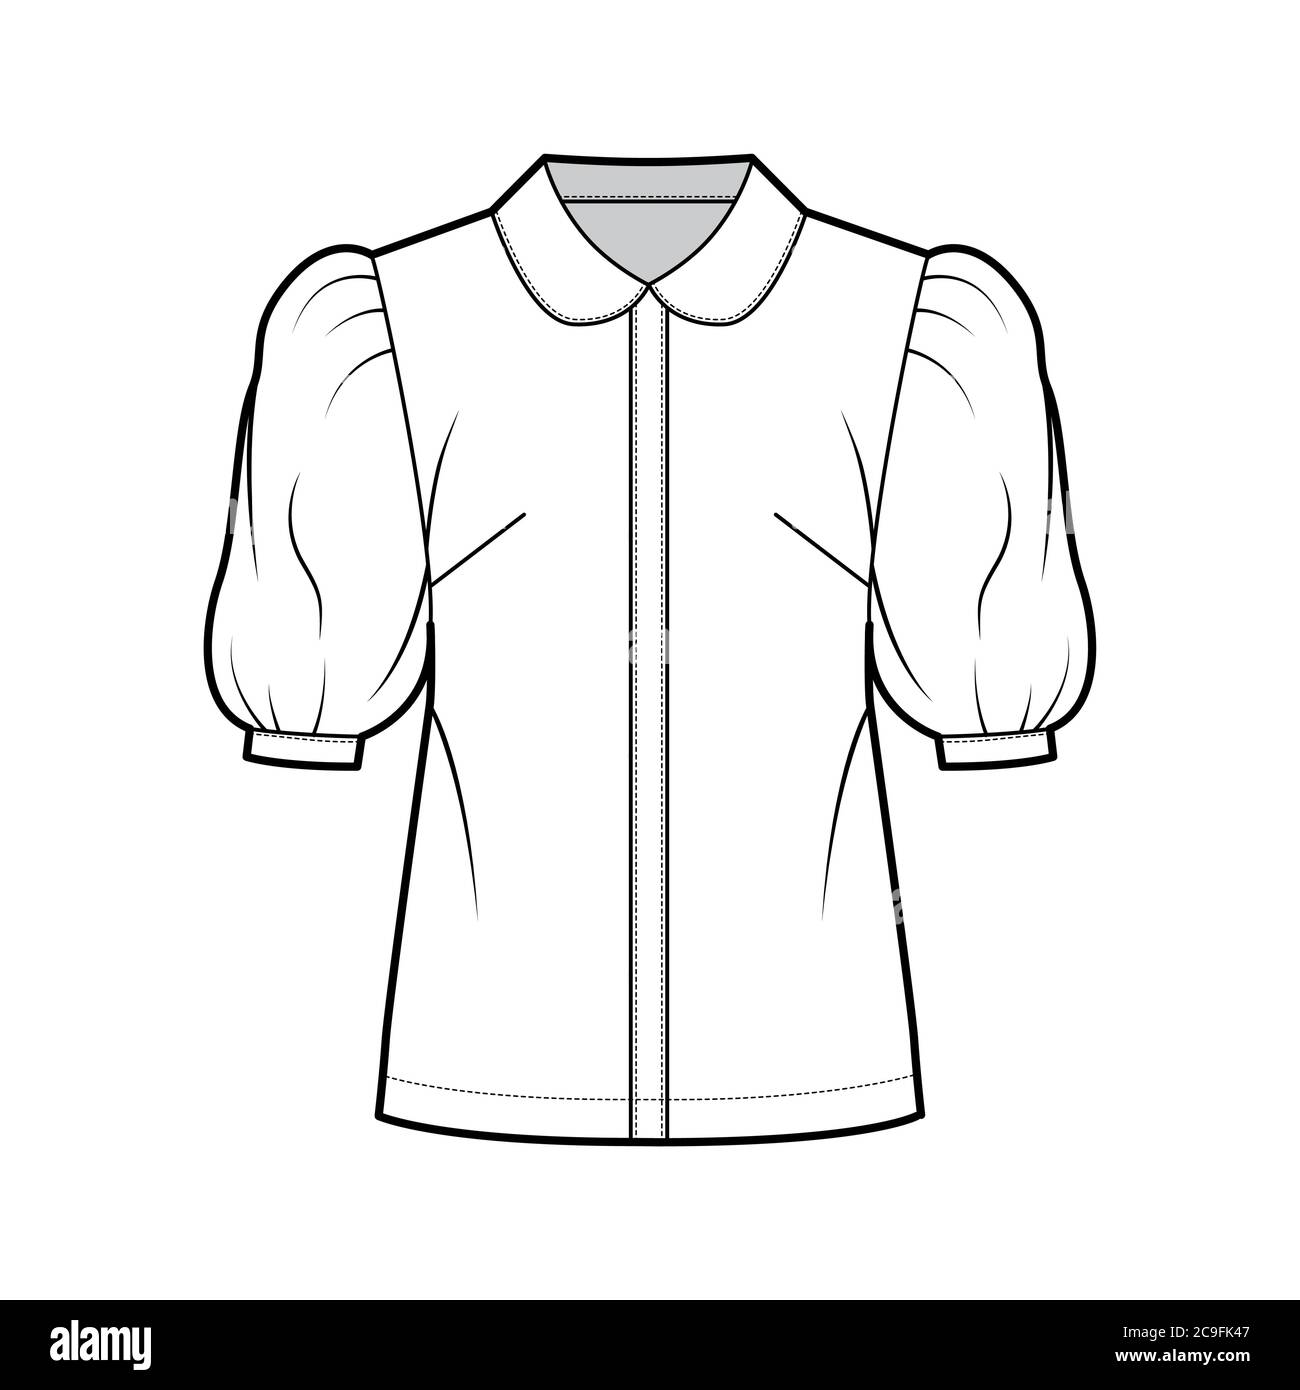 Elbow puff sleeve shirt technical fashion illustration with round collar, front button-fastening, loose silhouette. Flat blouse apparel template front, white color. Women, men unisex top CAD mockup Stock Vector